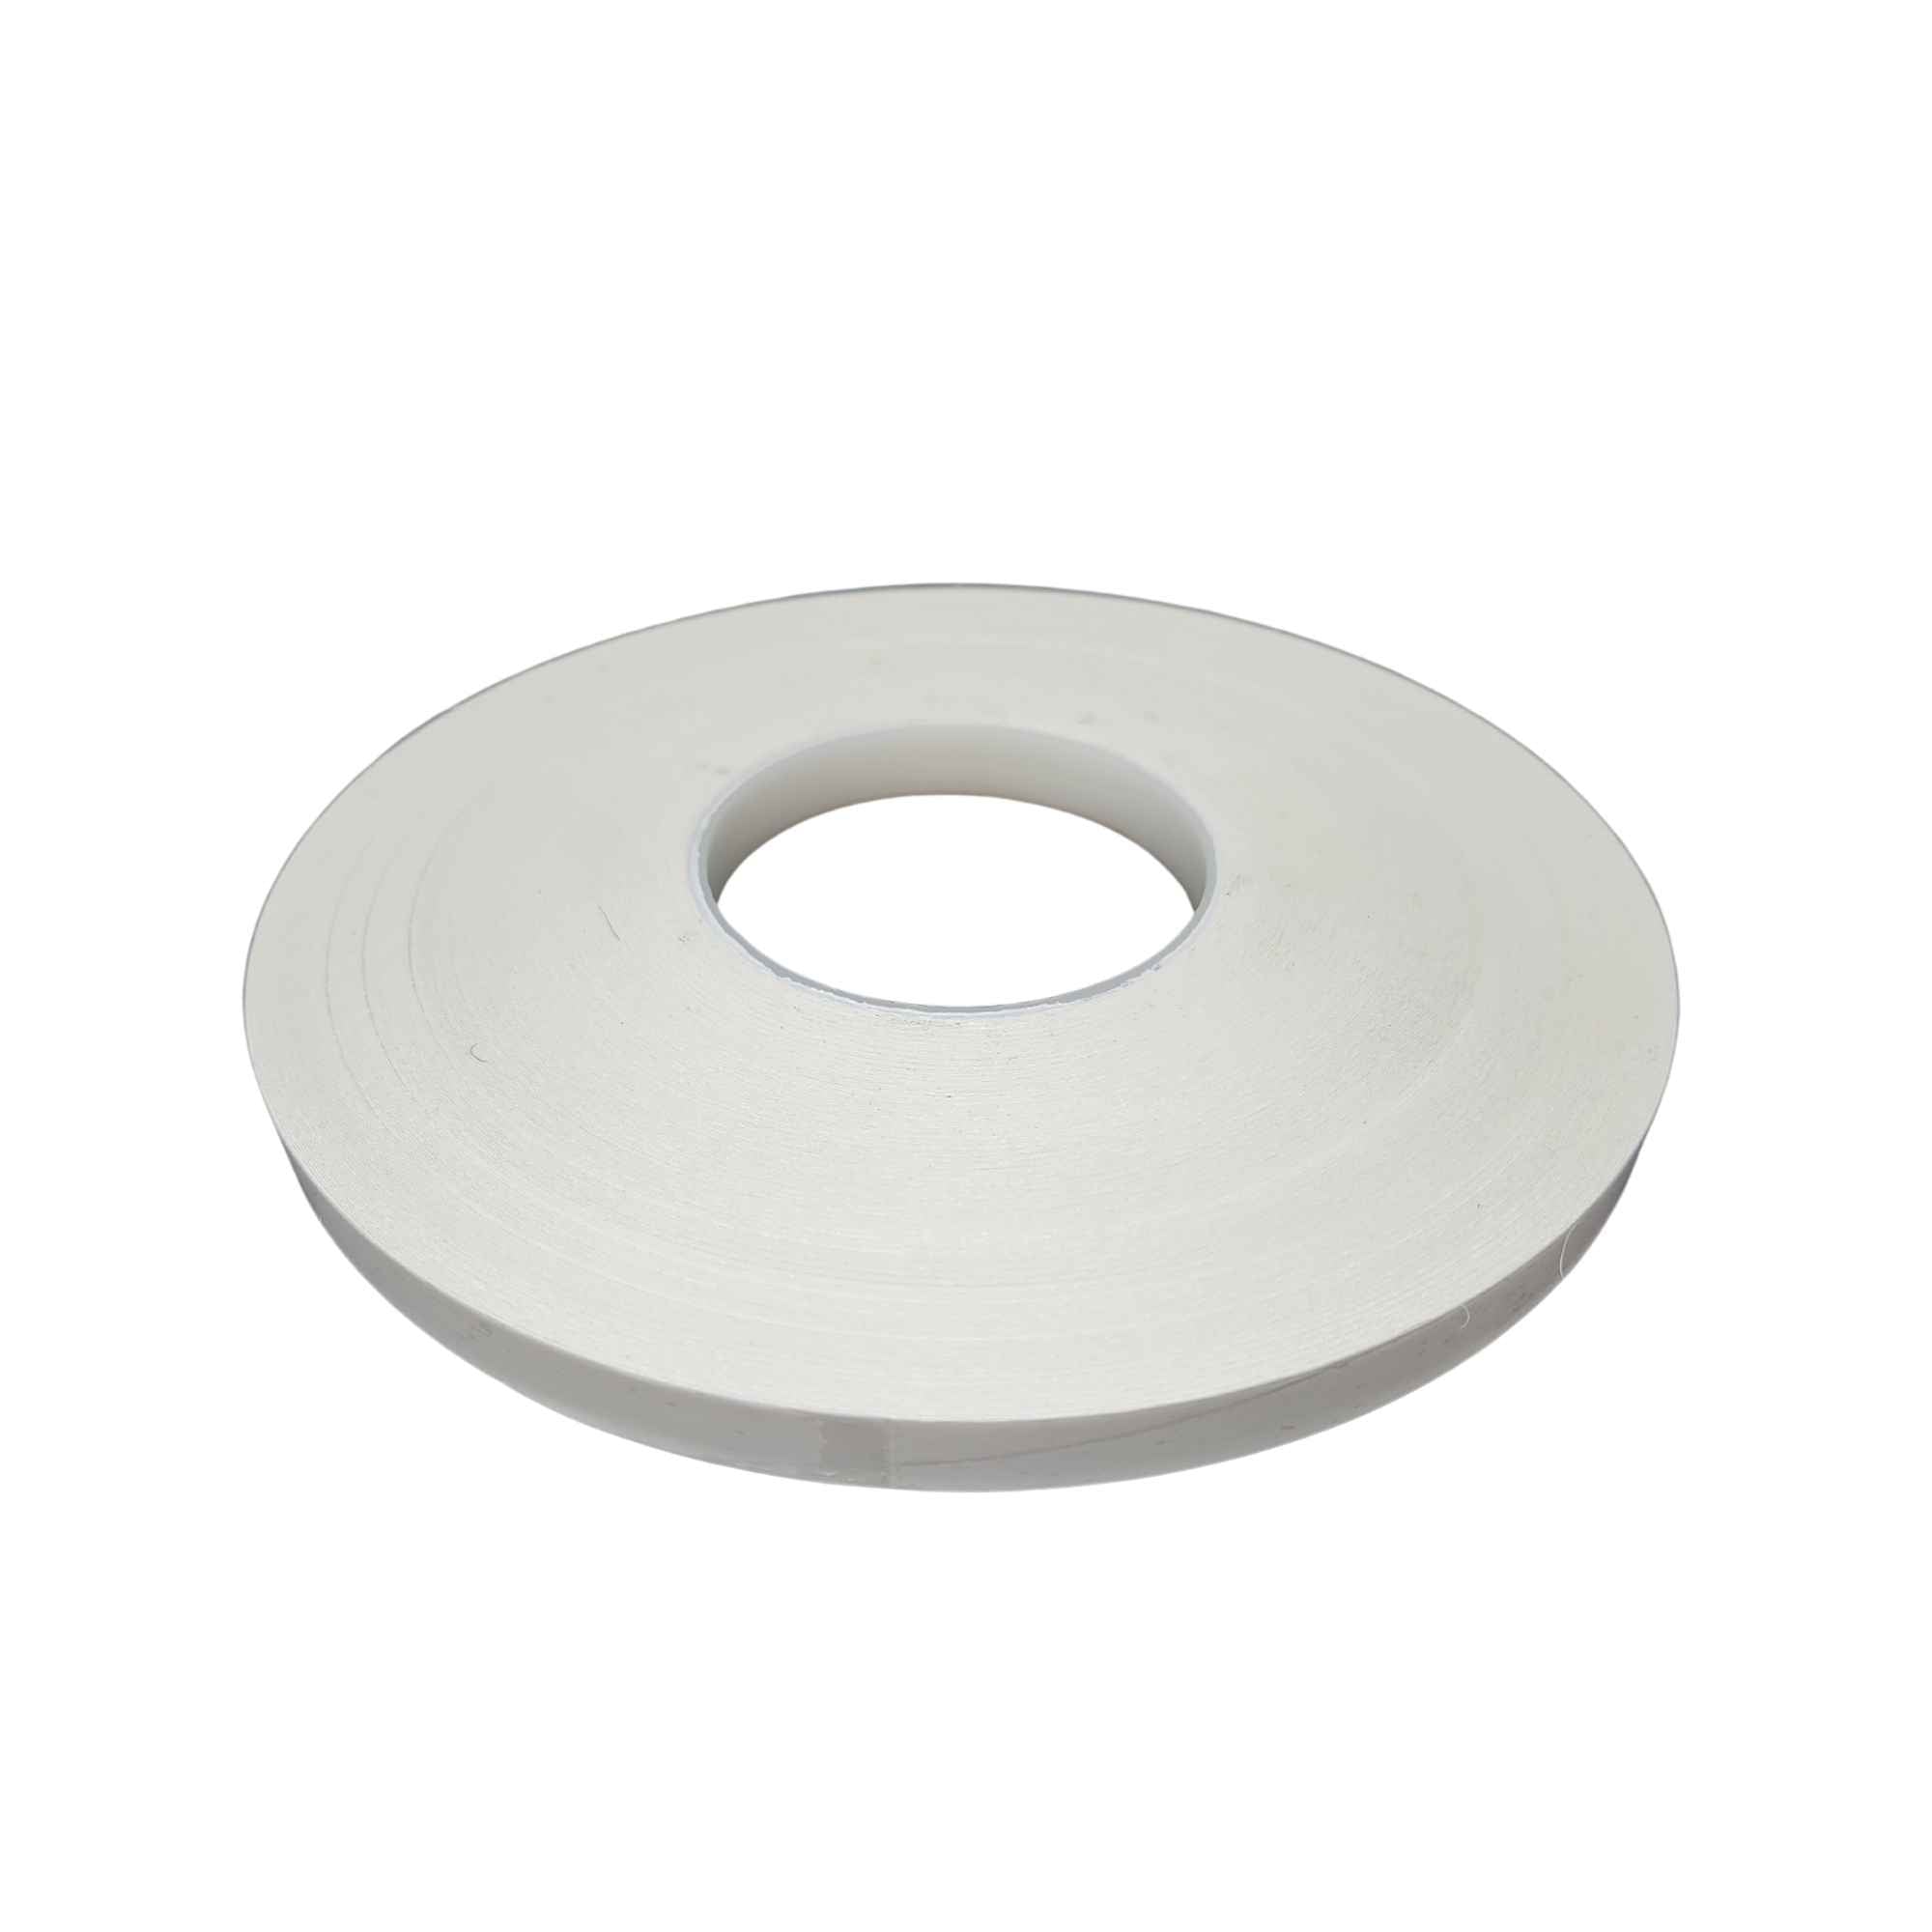 Dyneema® Composite Fabric Double-Sided Adhesive Tape - Full Spools